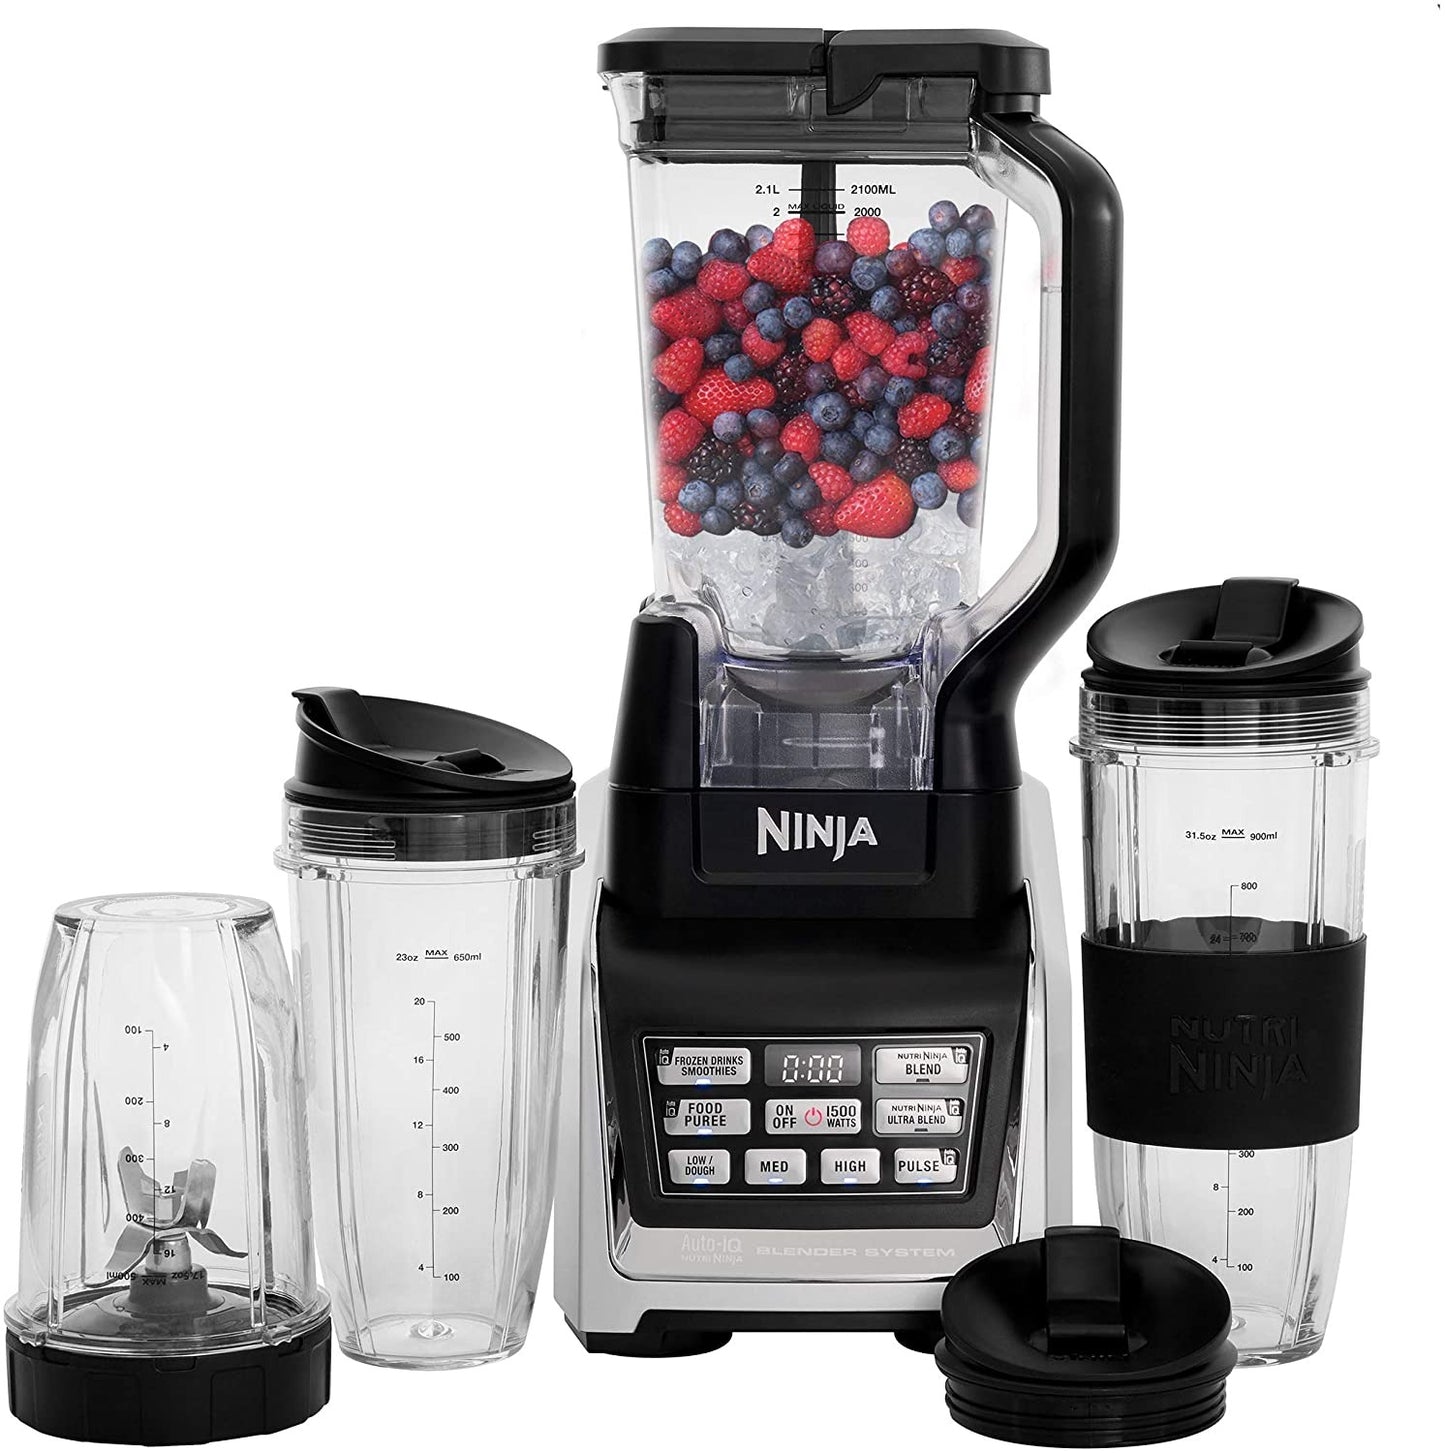 Nutri Ninja BL642 Personal and Countertop Blender with 1200-Watt Auto-iQ Base, 72-Ounce Pitcher, and 18, 24, and 32-Ounce Cups with Spout Lids